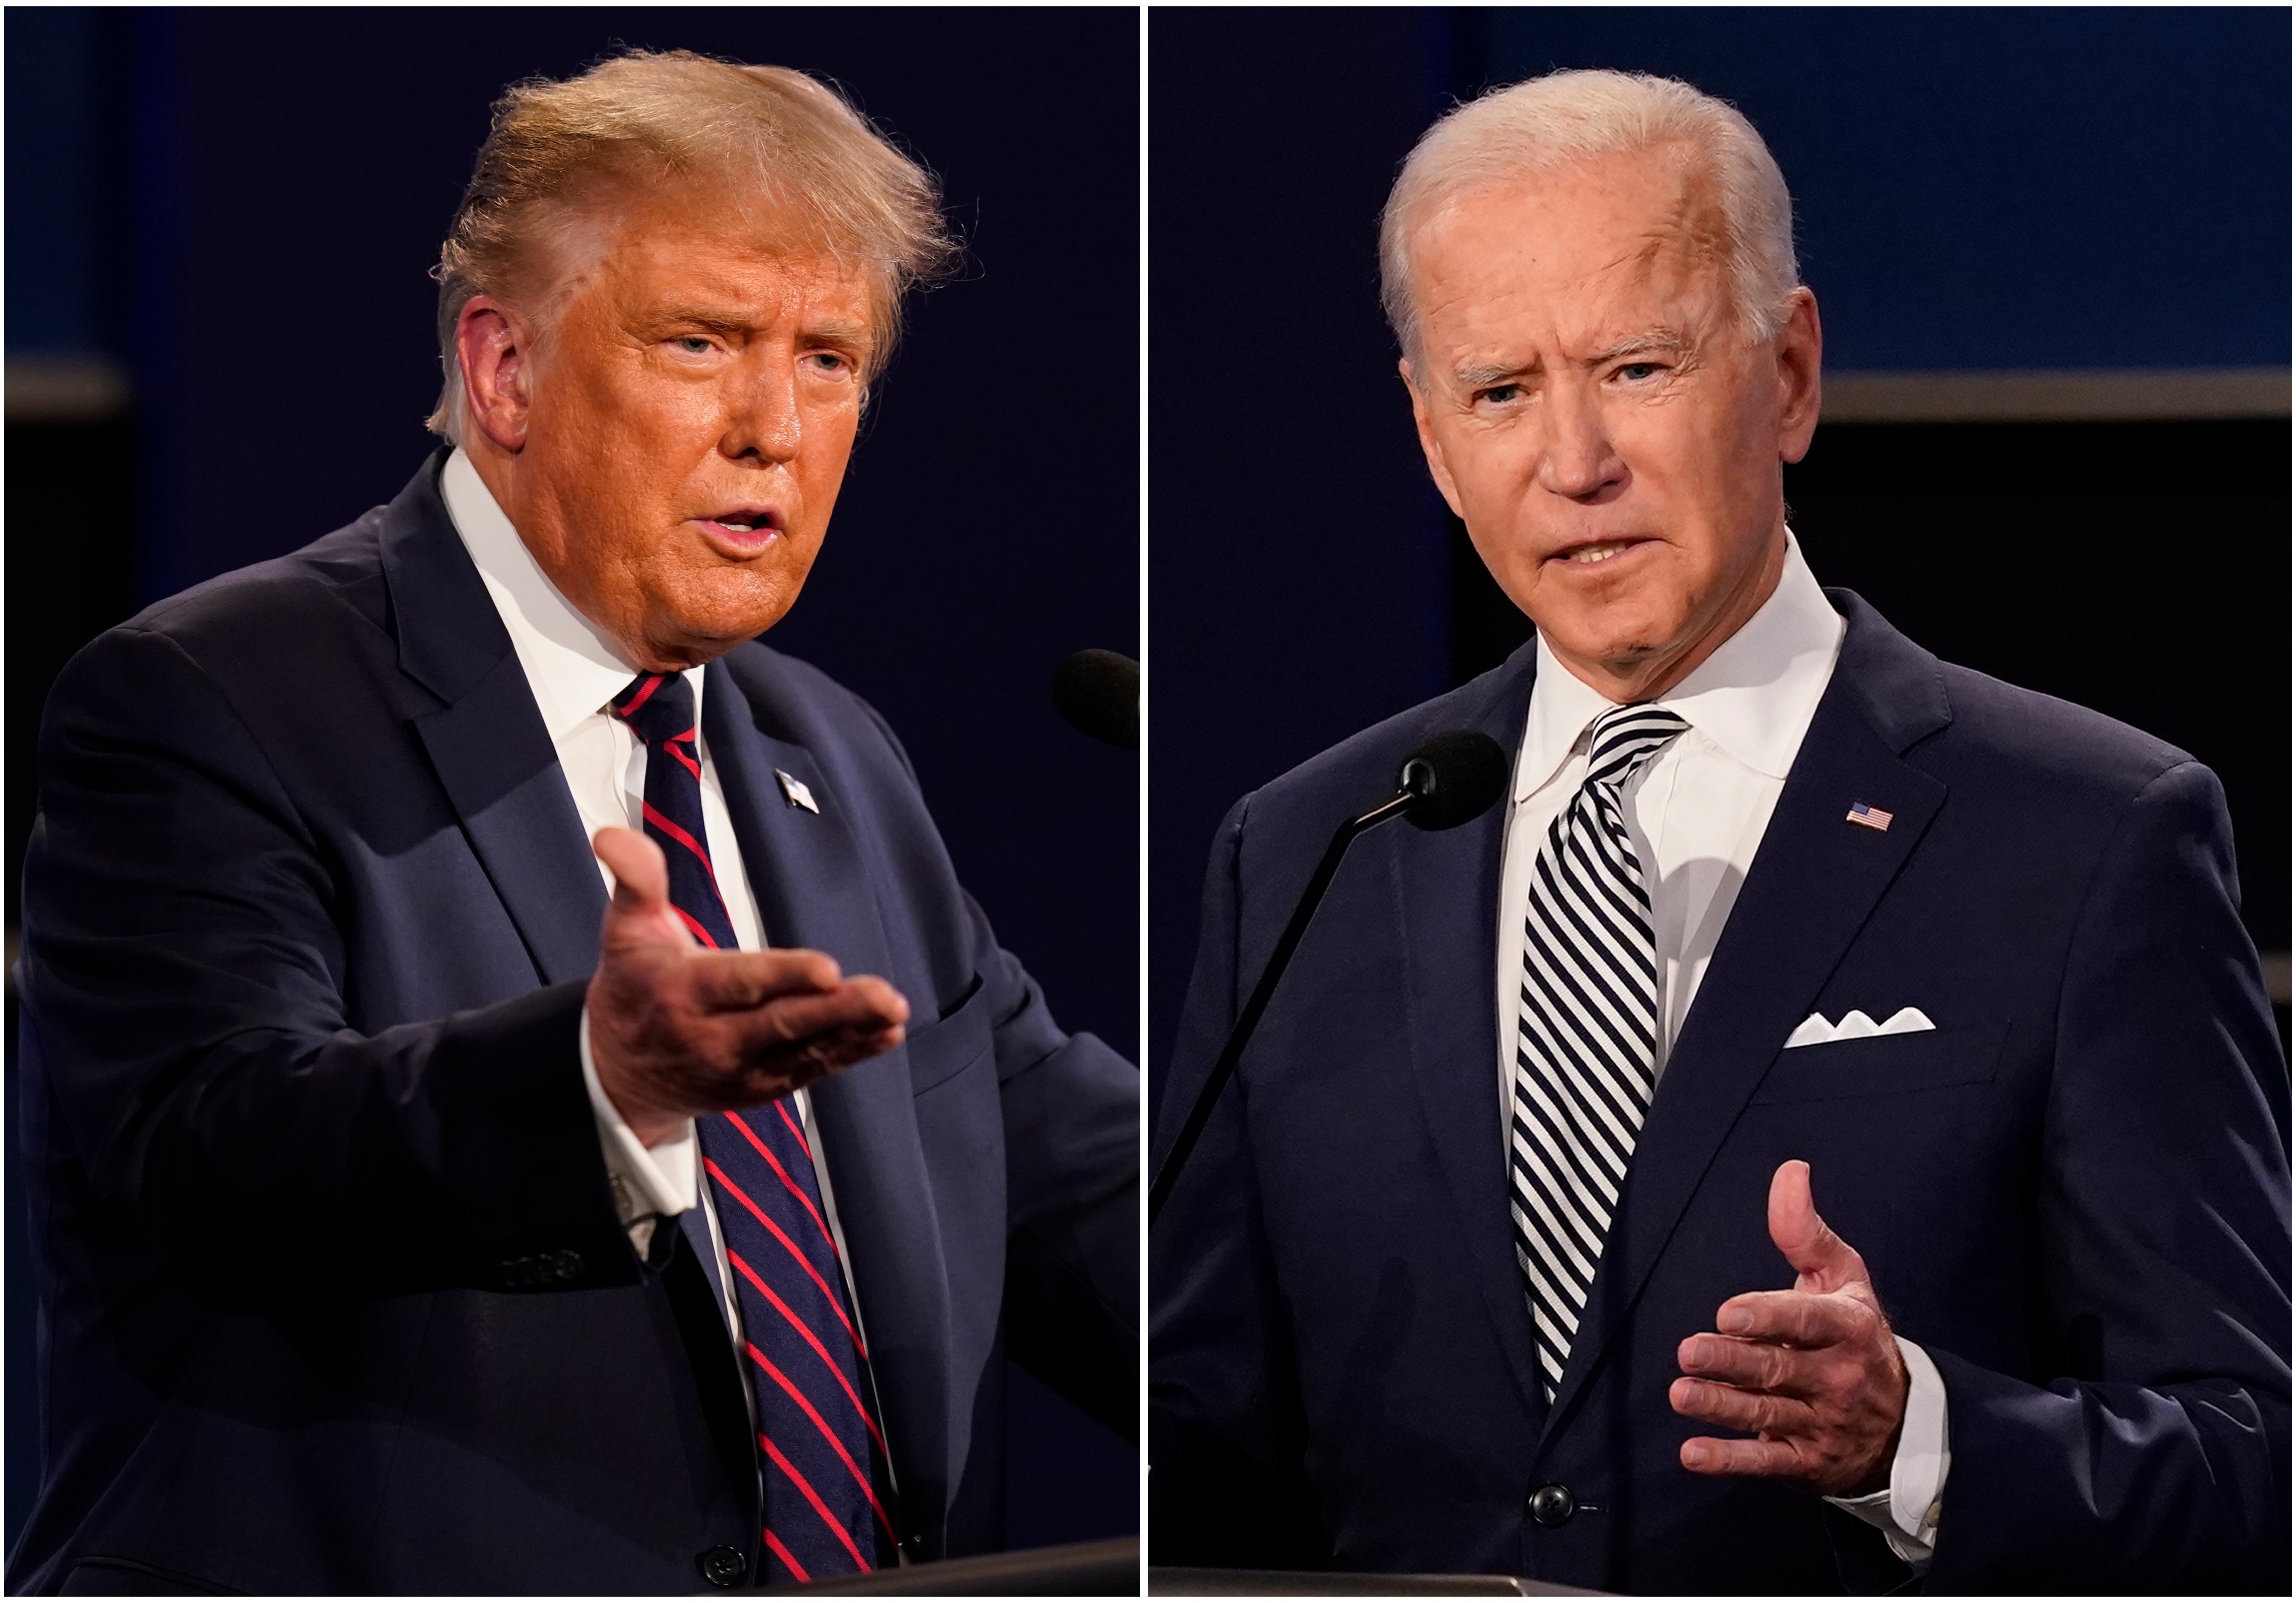 President Donald Trump, left, and former Vice President Joe Biden during the first presidential debate at Case Western University and Cleveland Clinic, in Cleveland, Ohio on 29 September 2020